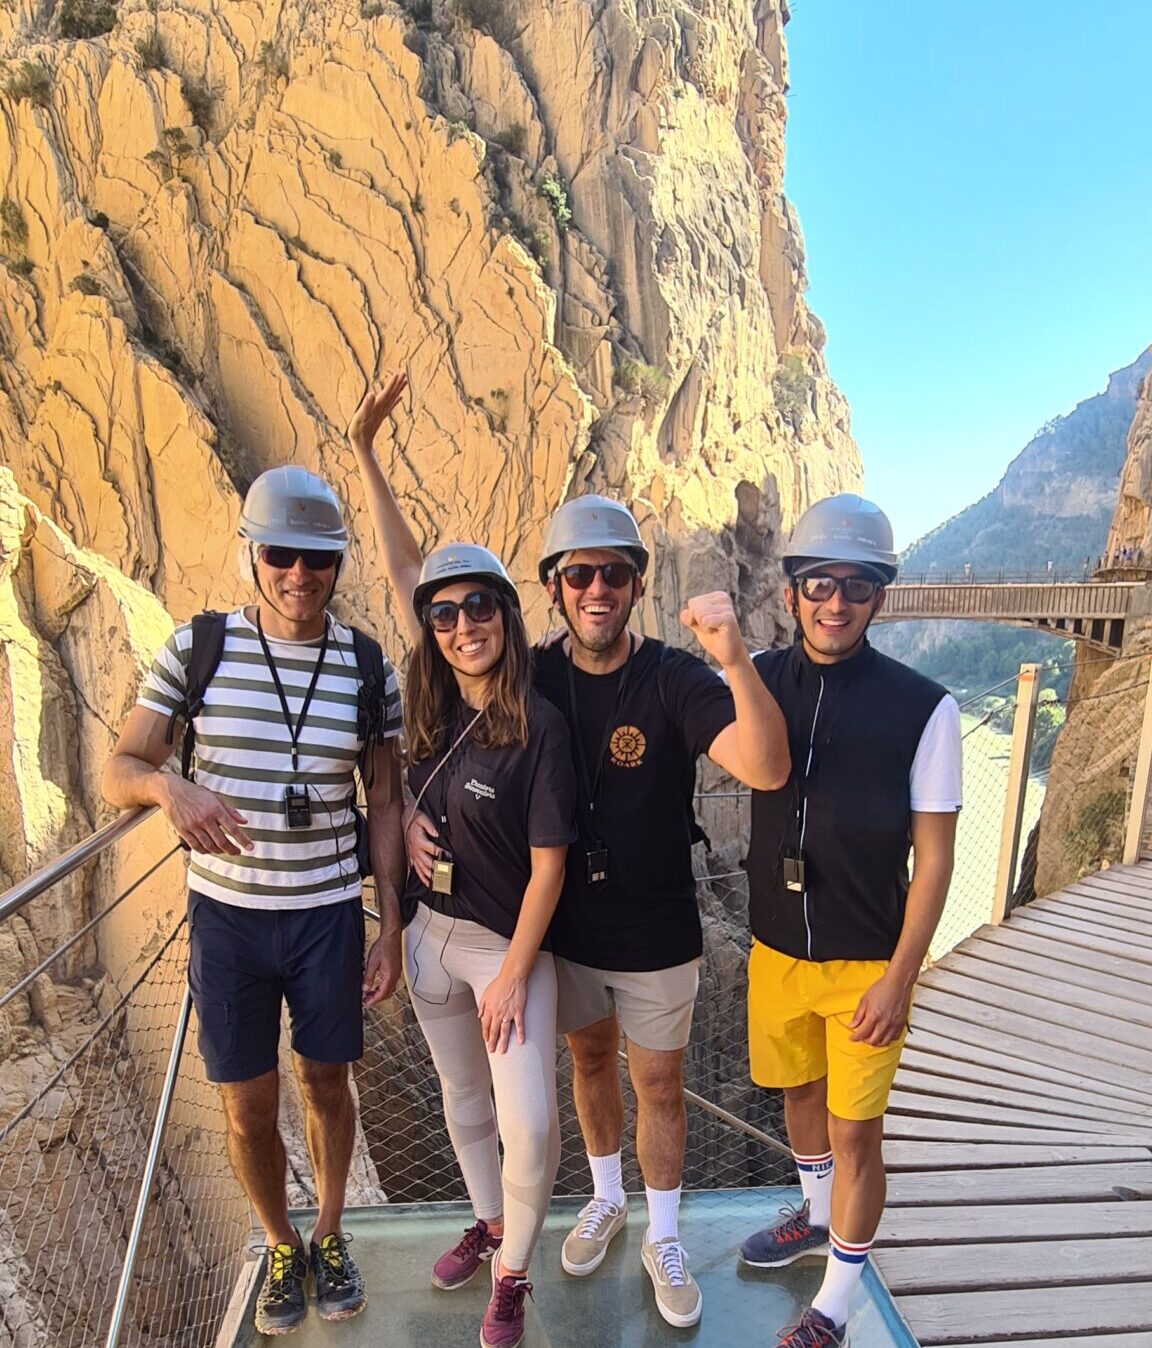 Caminito del Rey tour from Malaga in a small group